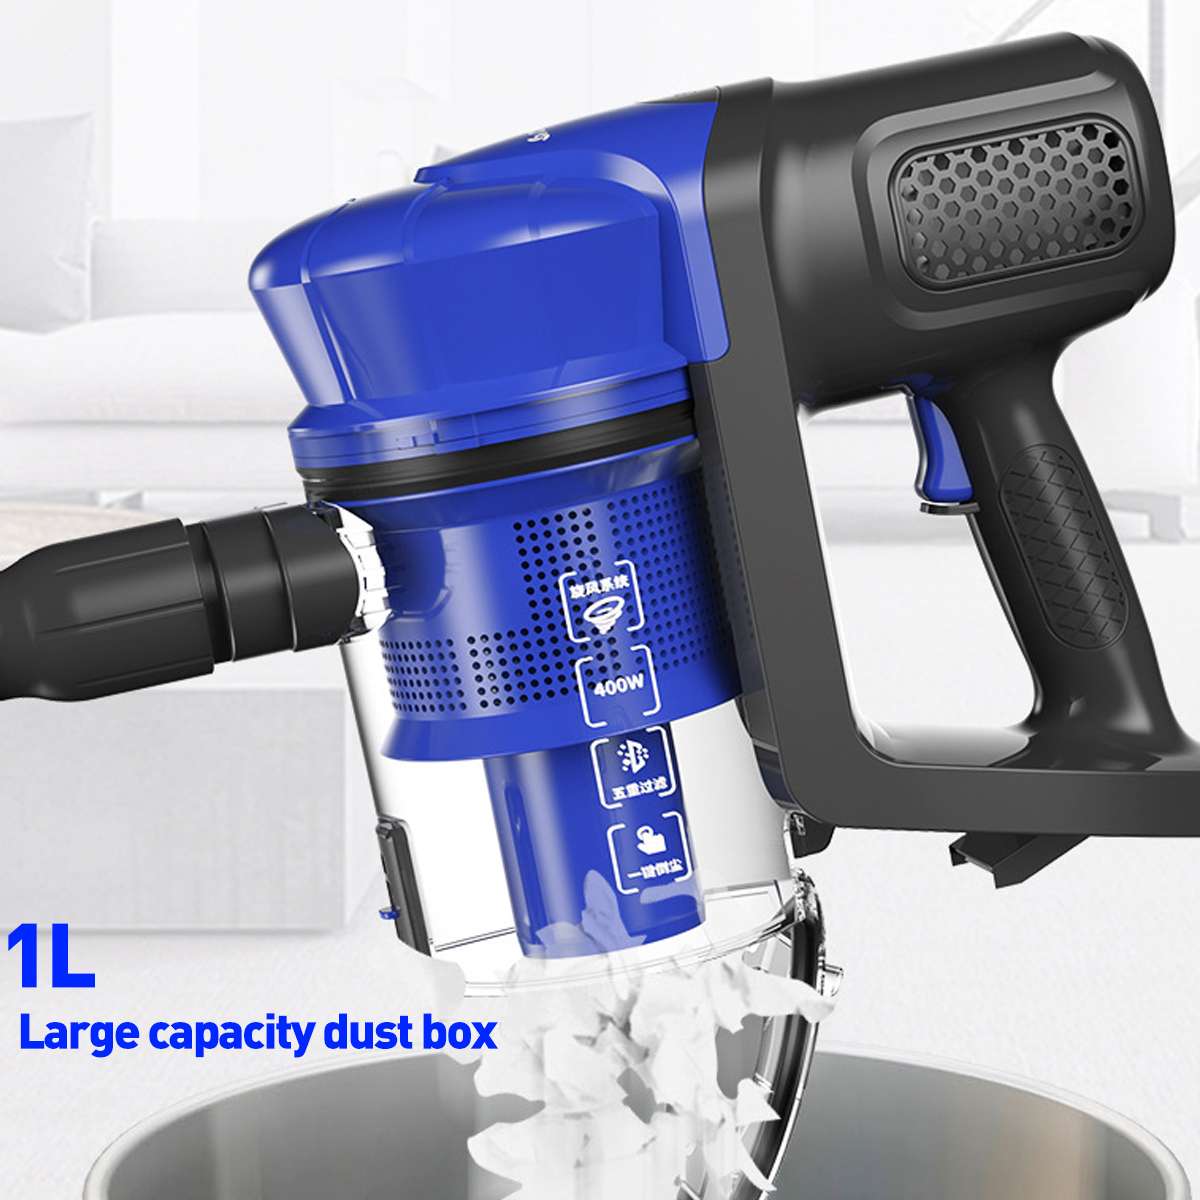 Portable Handheld Vacuum Cleaner 220V 13800Pa Strong Suction Cyclone Filter Carpet Dust Collector Hand Stick Aspirator For Home